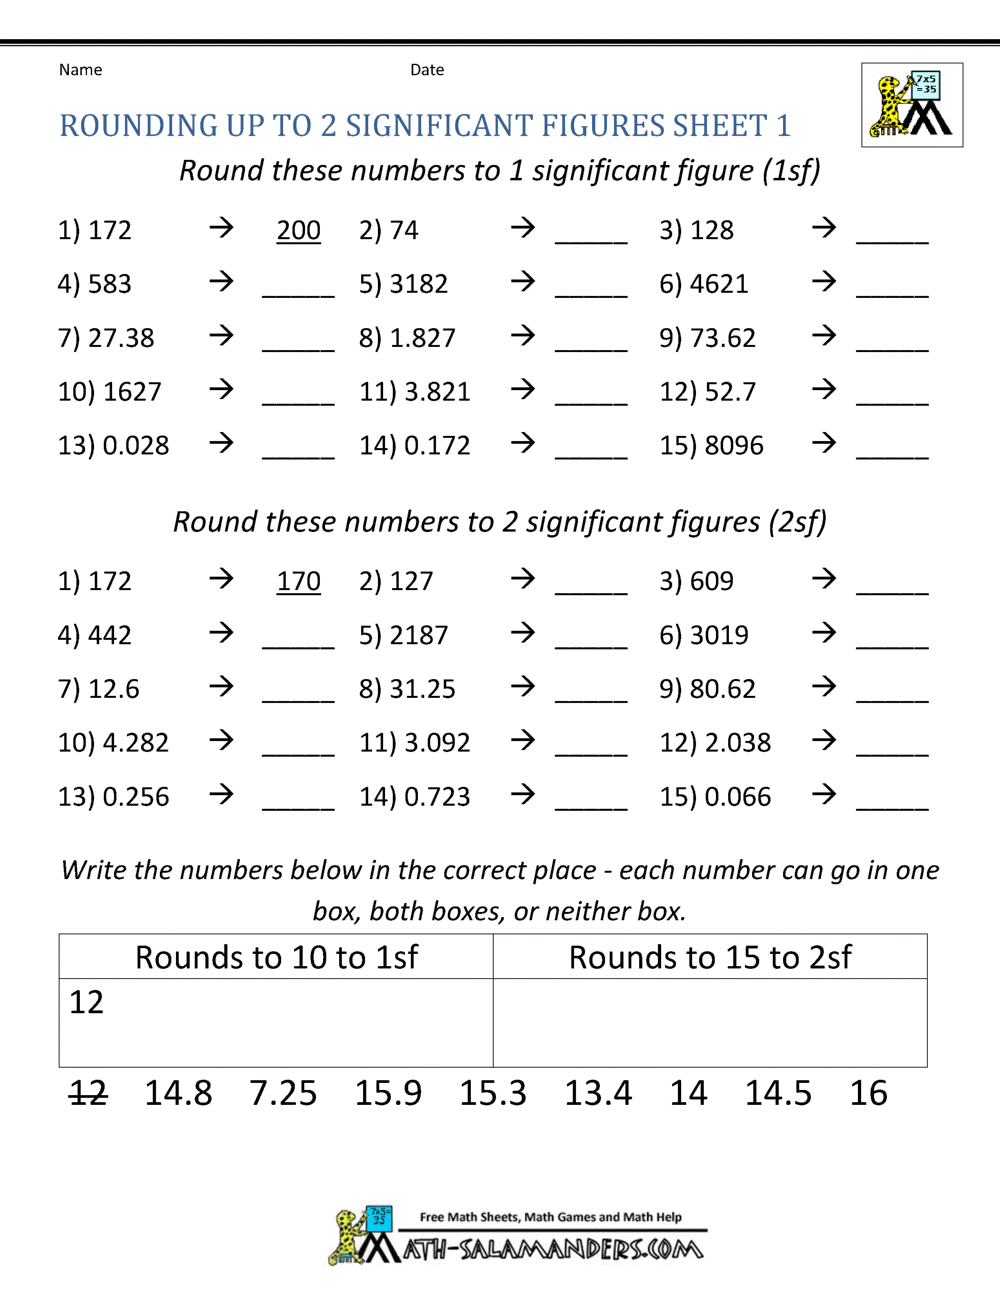 Rounding Significant Figures Throughout Significant Figures Worksheet Answers